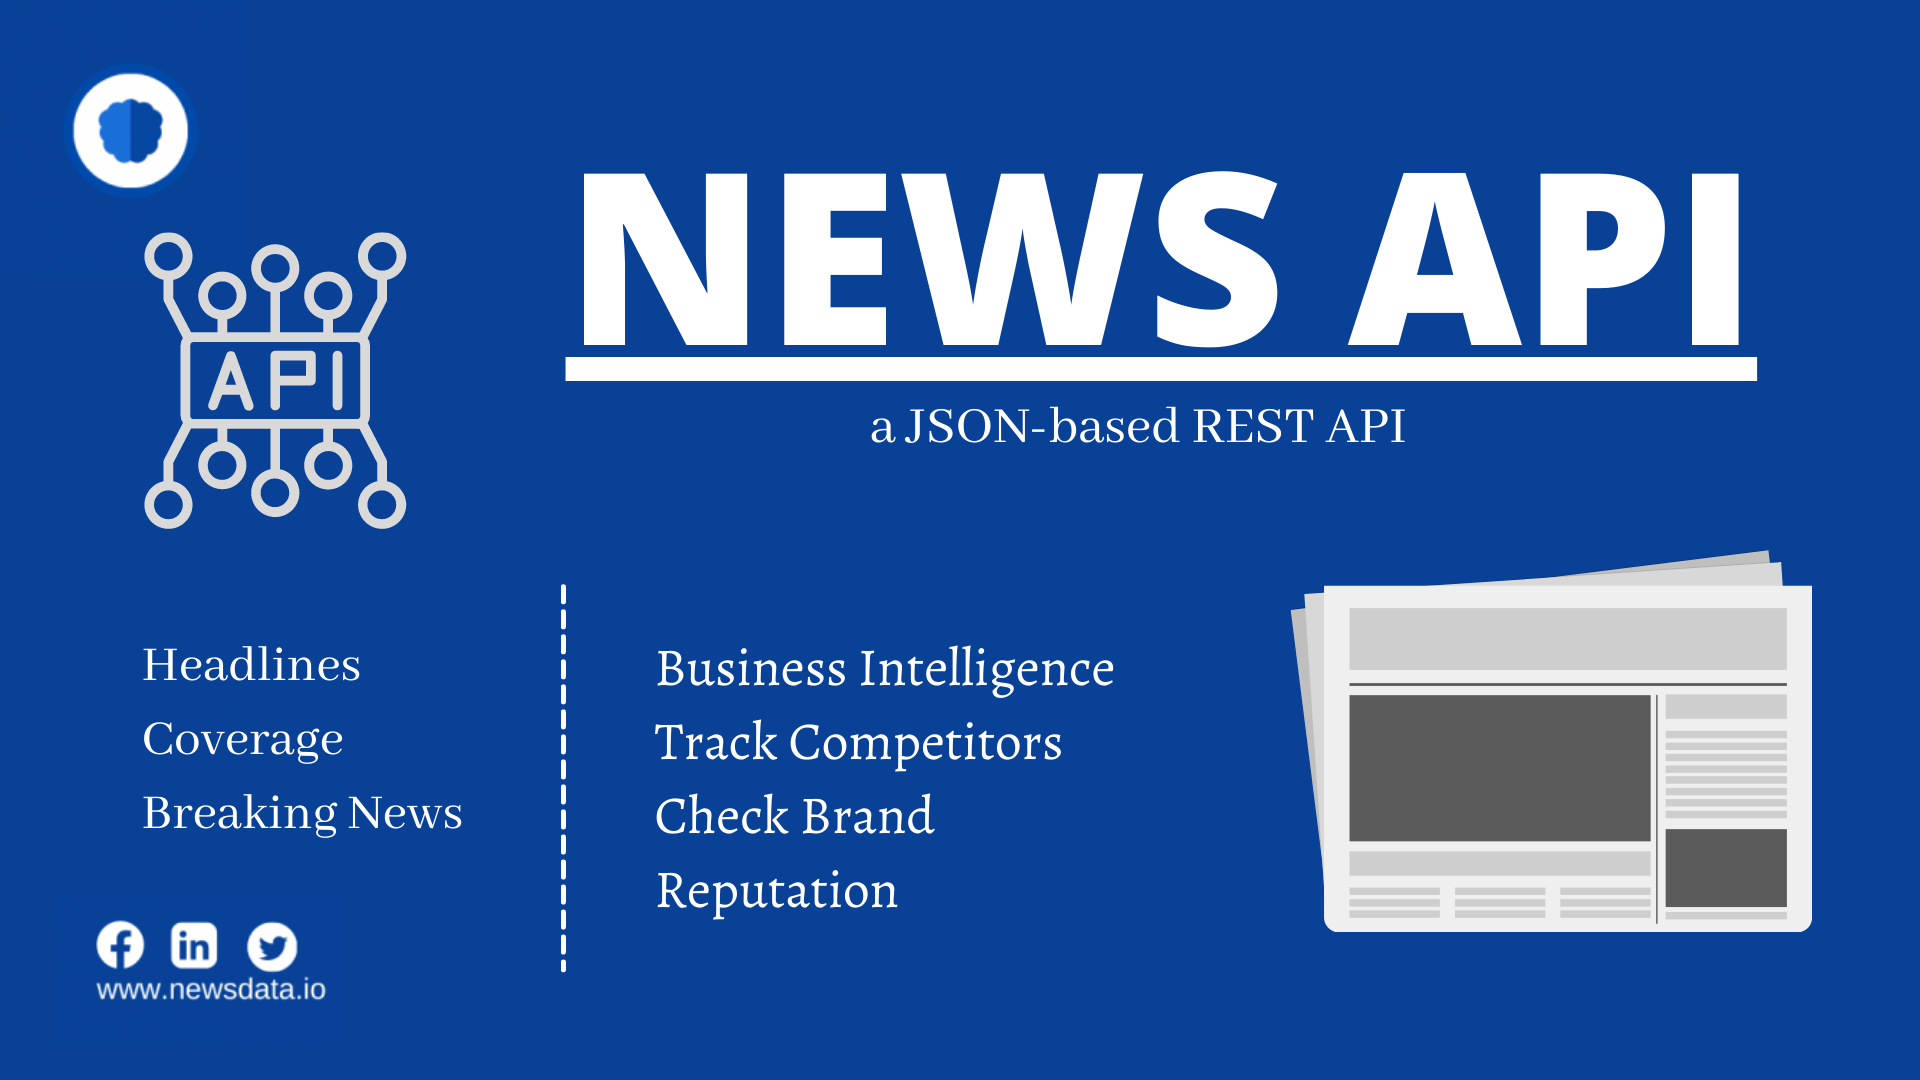 A news API is a JSON-based REST API (RESTful API) that allows you to explore and fetch news articles or news sources from all over the web as per the needs of users. News API lets you track various news sources referring to the topics (or keywords) you are searching which you are allowed to scan, analyze, and enrich the data to serve various use cases that you have planned.